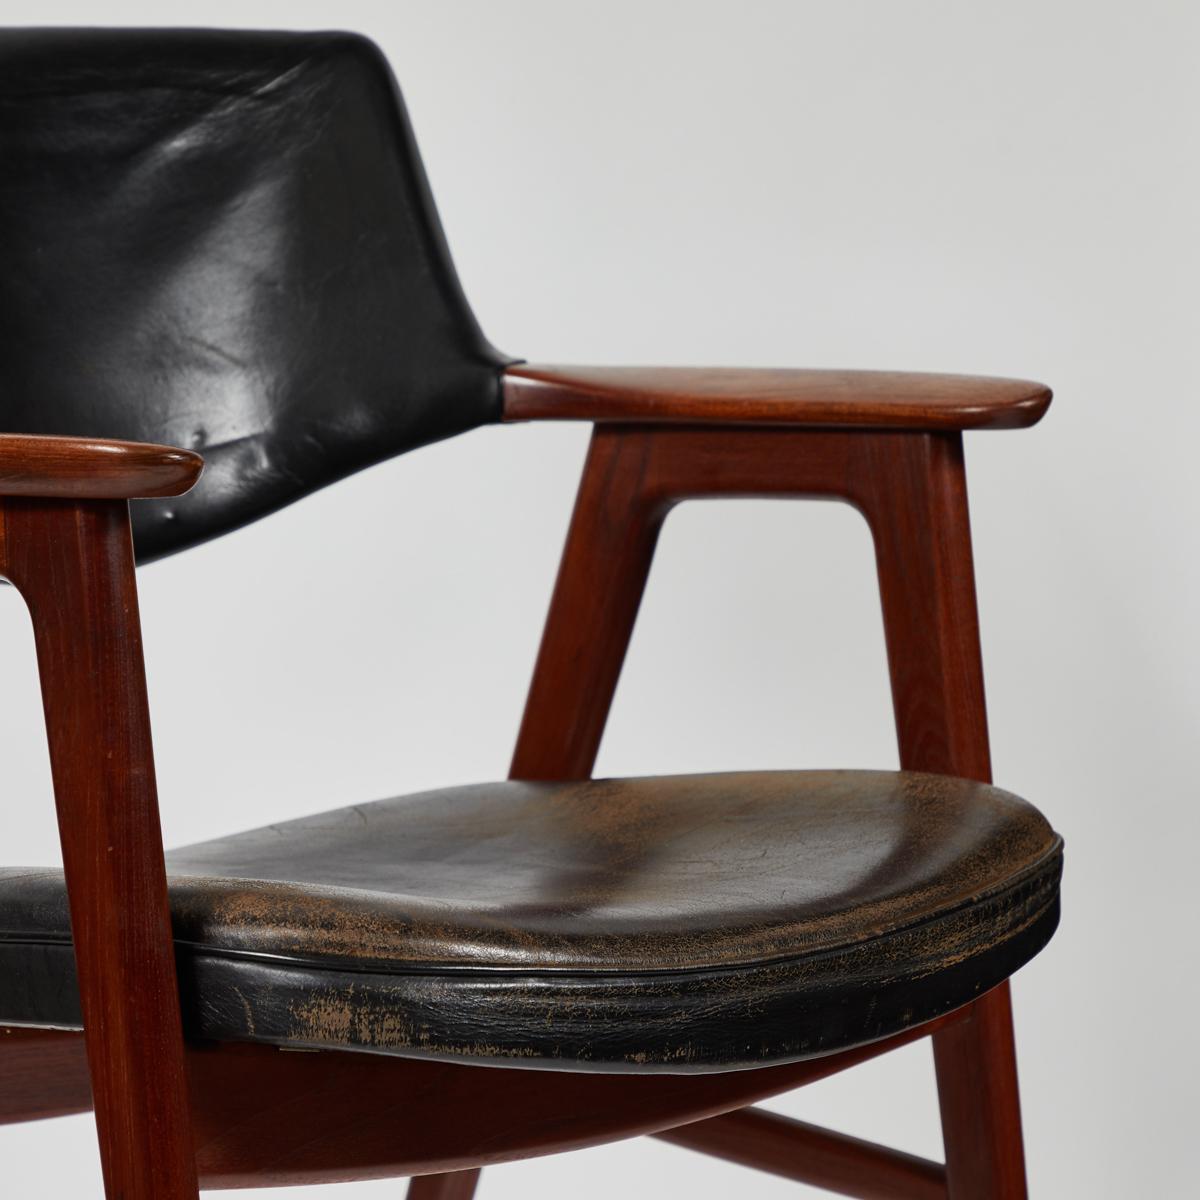 French 1940s mahogany armchair with seat and back upholstered in black leather. The smooth elliptical shapes and mid-century modern lines make this a stylish addition to any desk or seating arrangement. 

France, circa 1940

Dimensions: 25W x 25D x